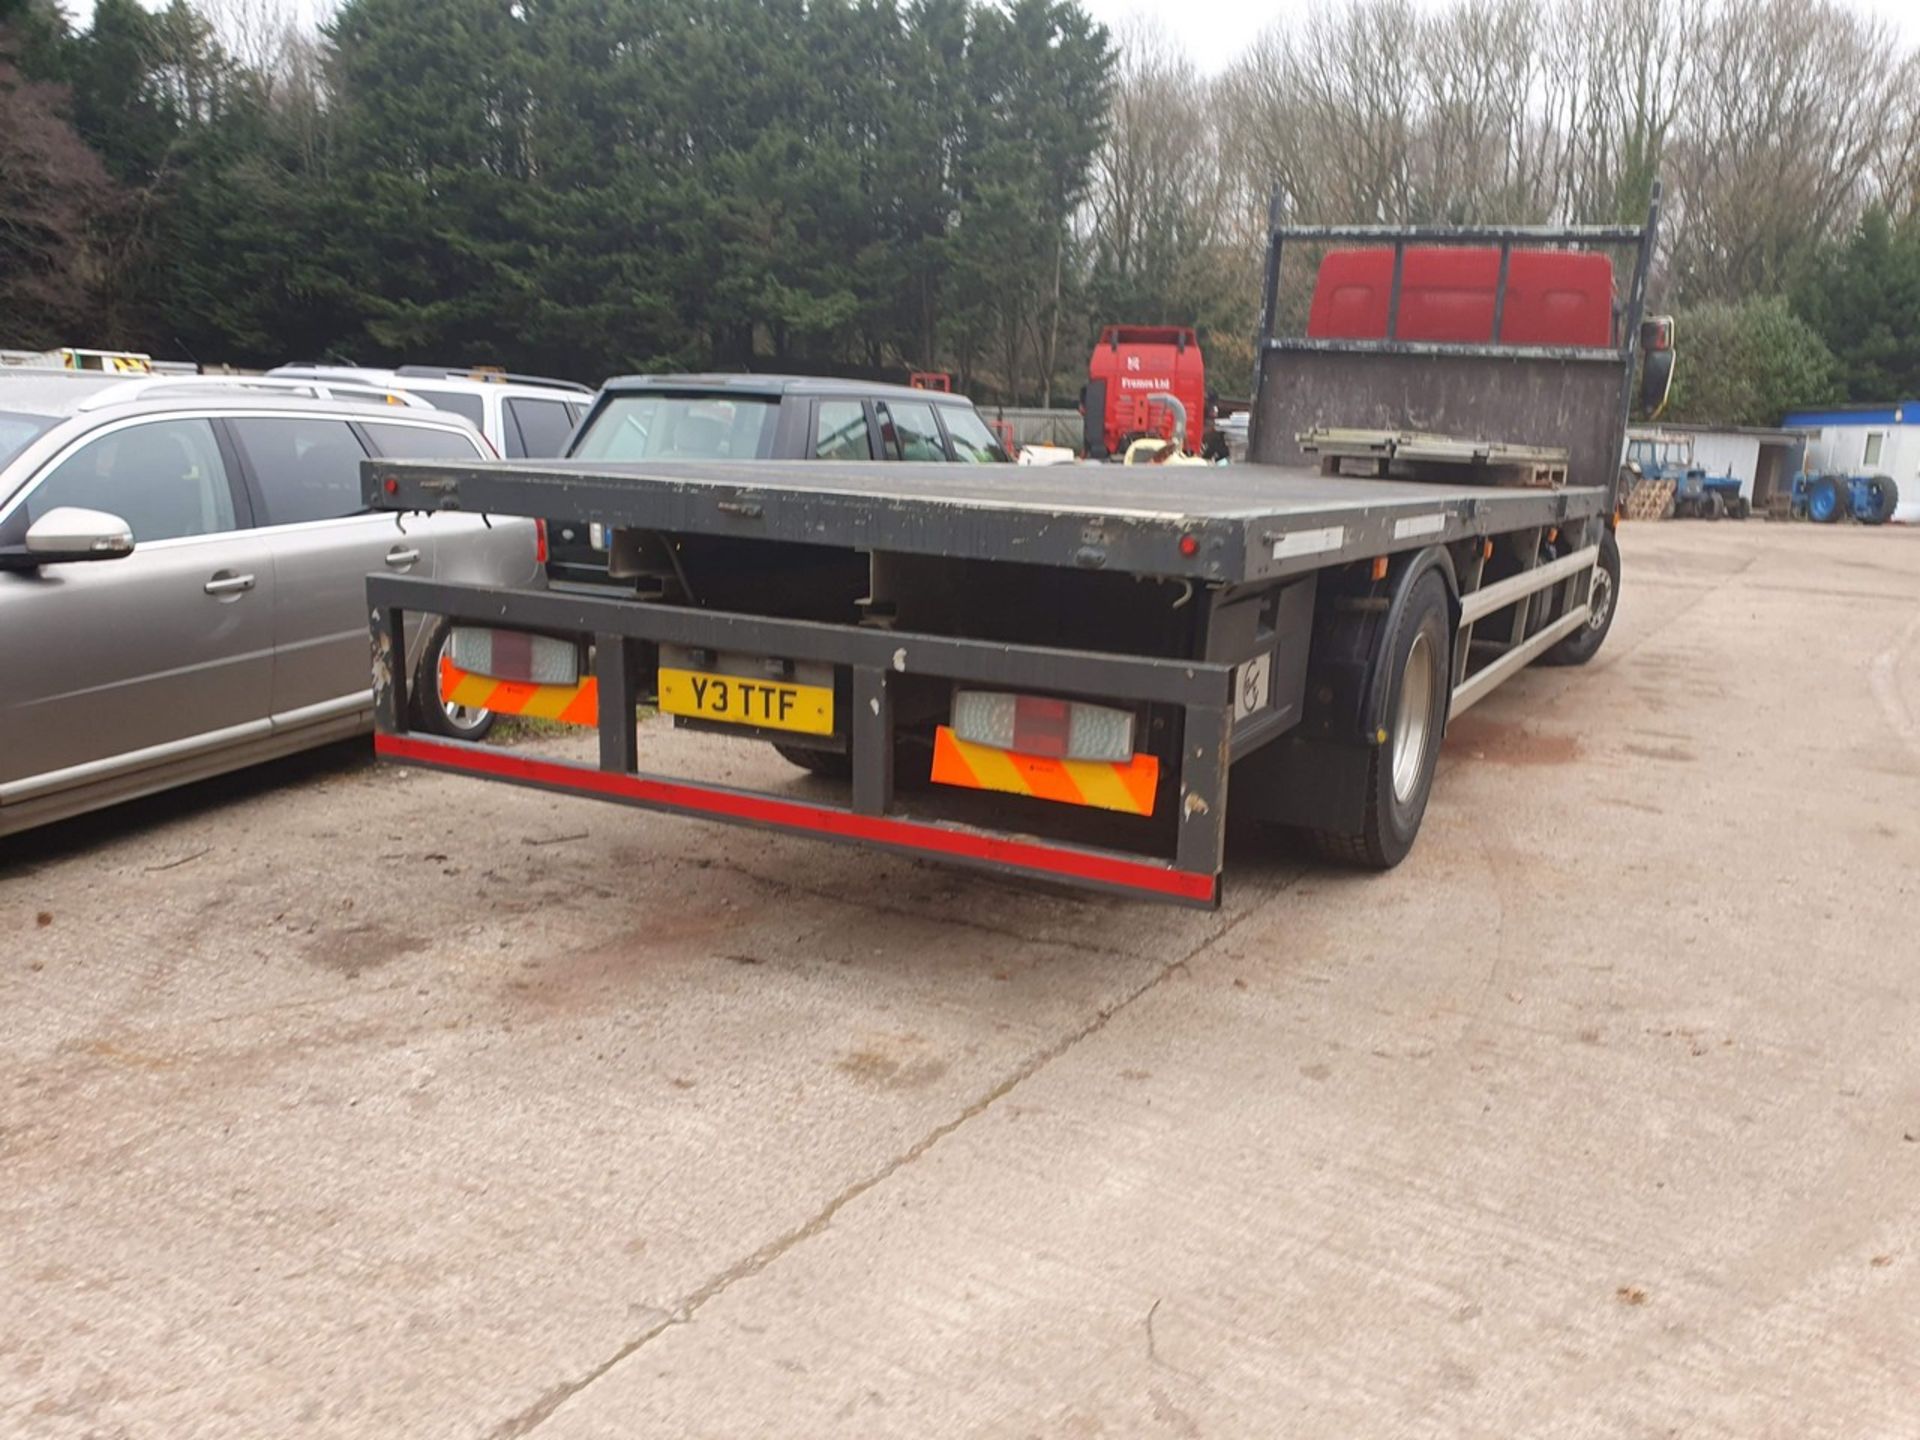 13/13 DAF TRUCKS FLAT BED - 6693cc 2dr (Red) - Image 19 of 23